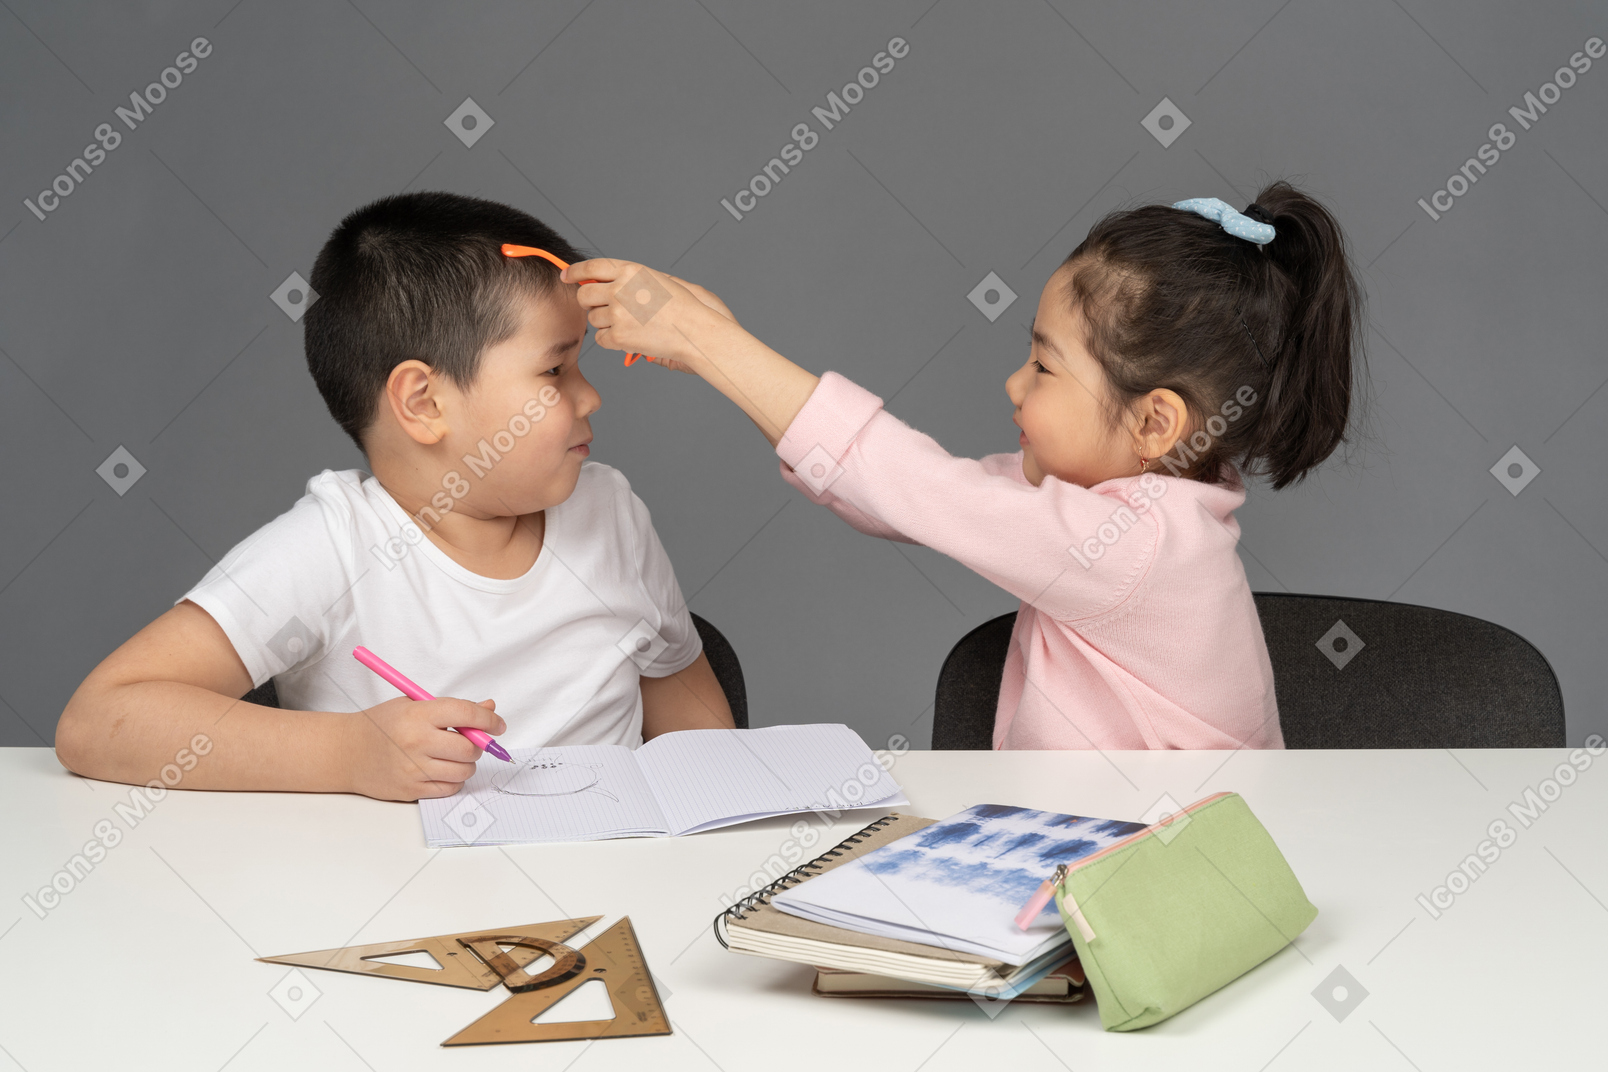 Little girl putting sunglasses on her brother